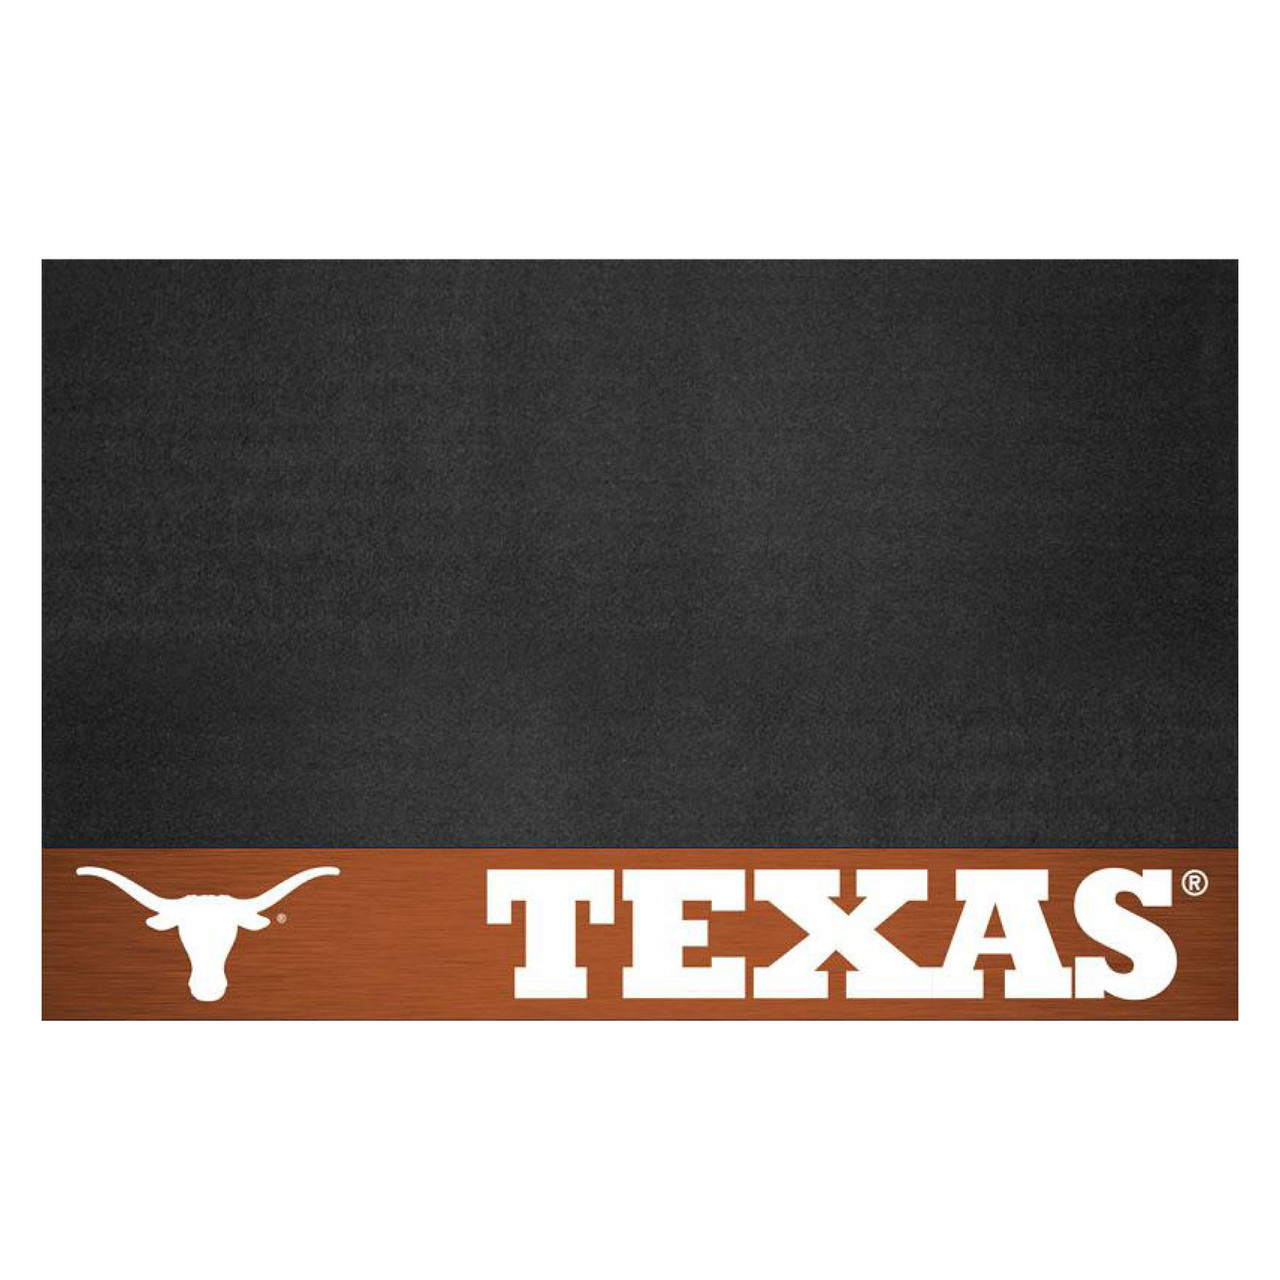 Texas Longhorns Deluxe Tailgating Chair